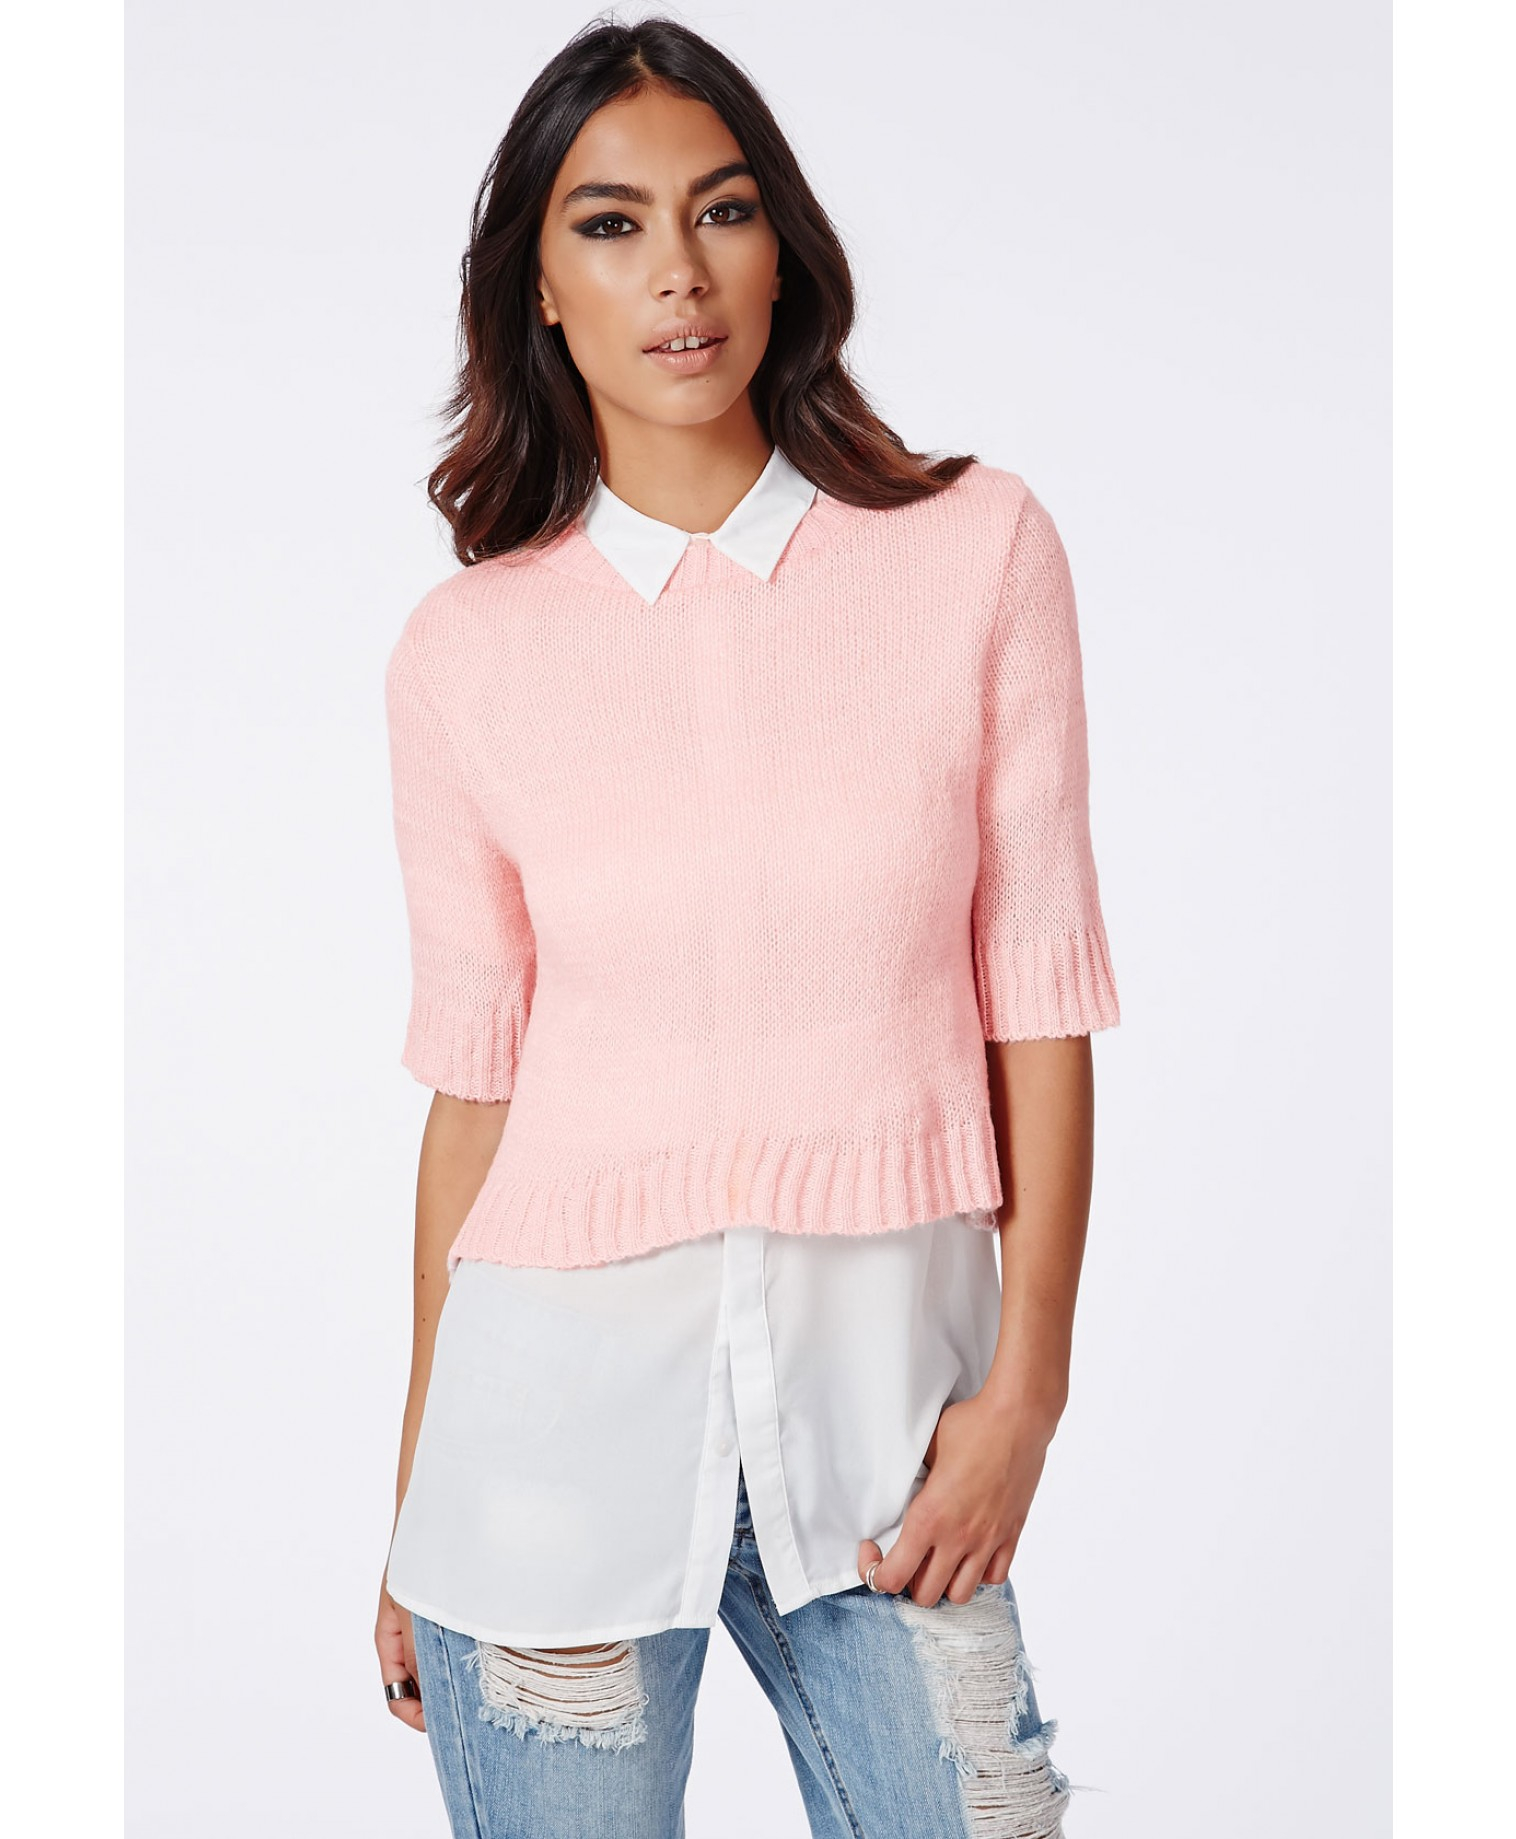 Missguided Kristyana Soft Knit Cropped Jumper In Baby Pink in Pink | Lyst